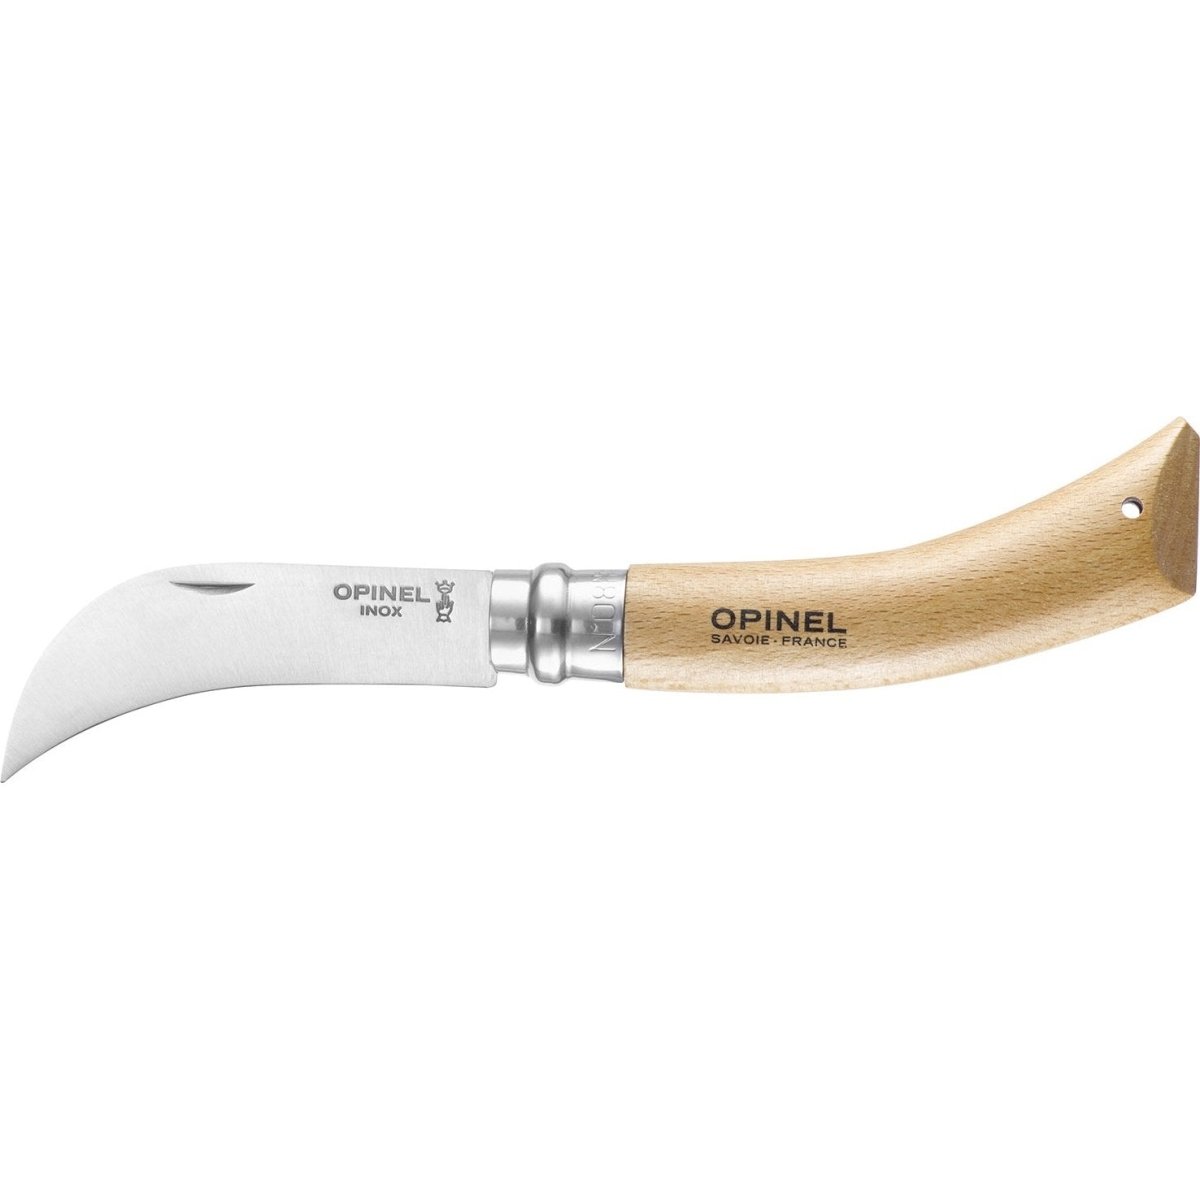 Pruning Knife - Opinel No 8 Stainless Steel Folding